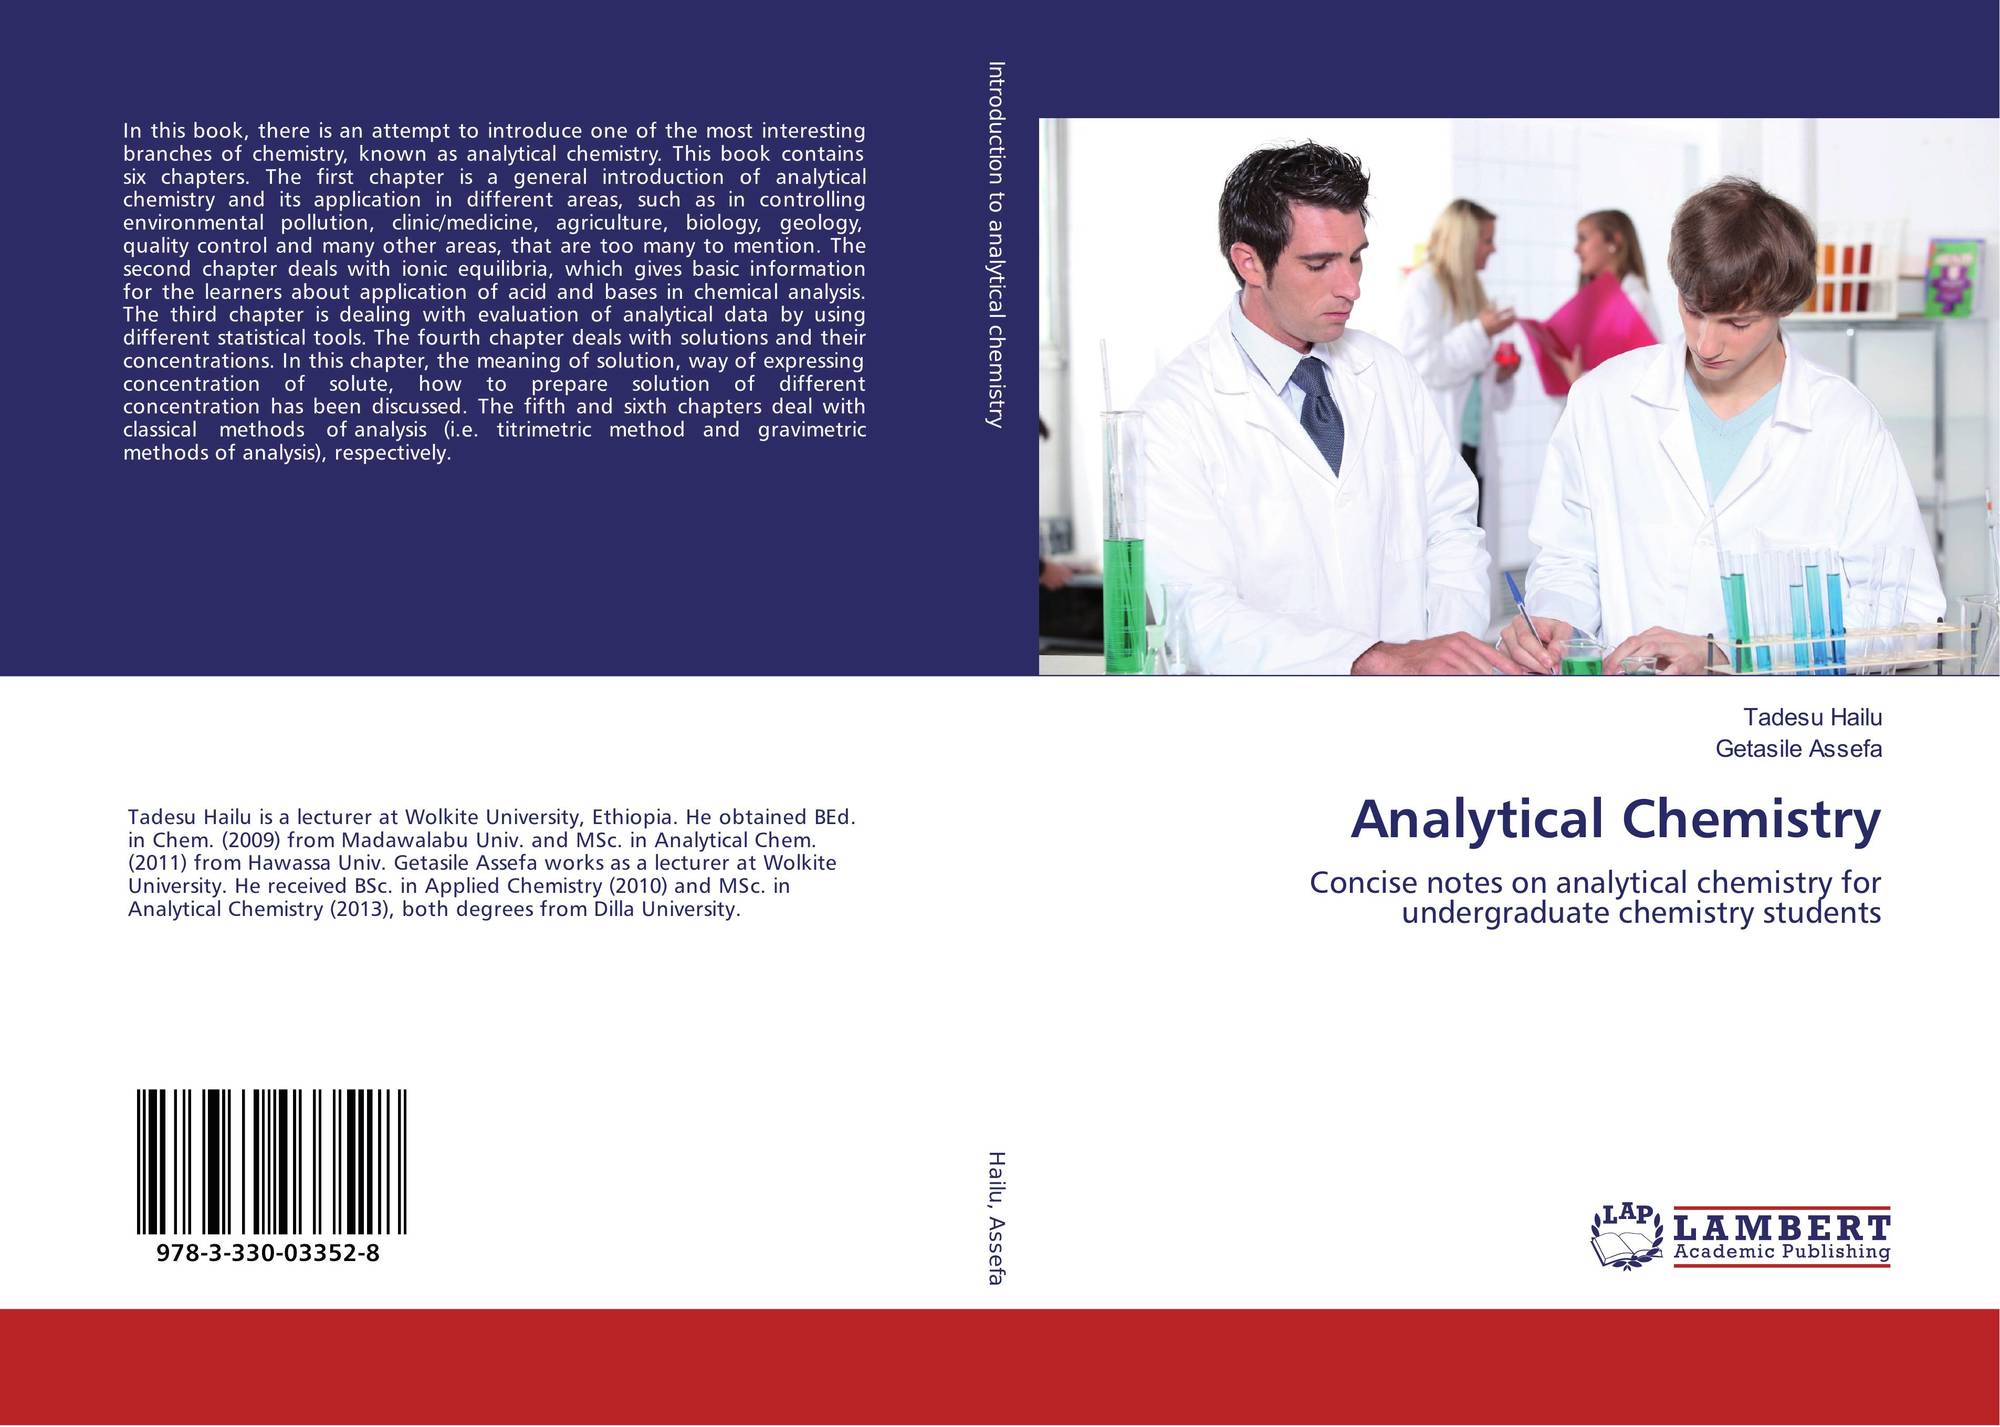 Analytical Chemistry book. Chemical book.